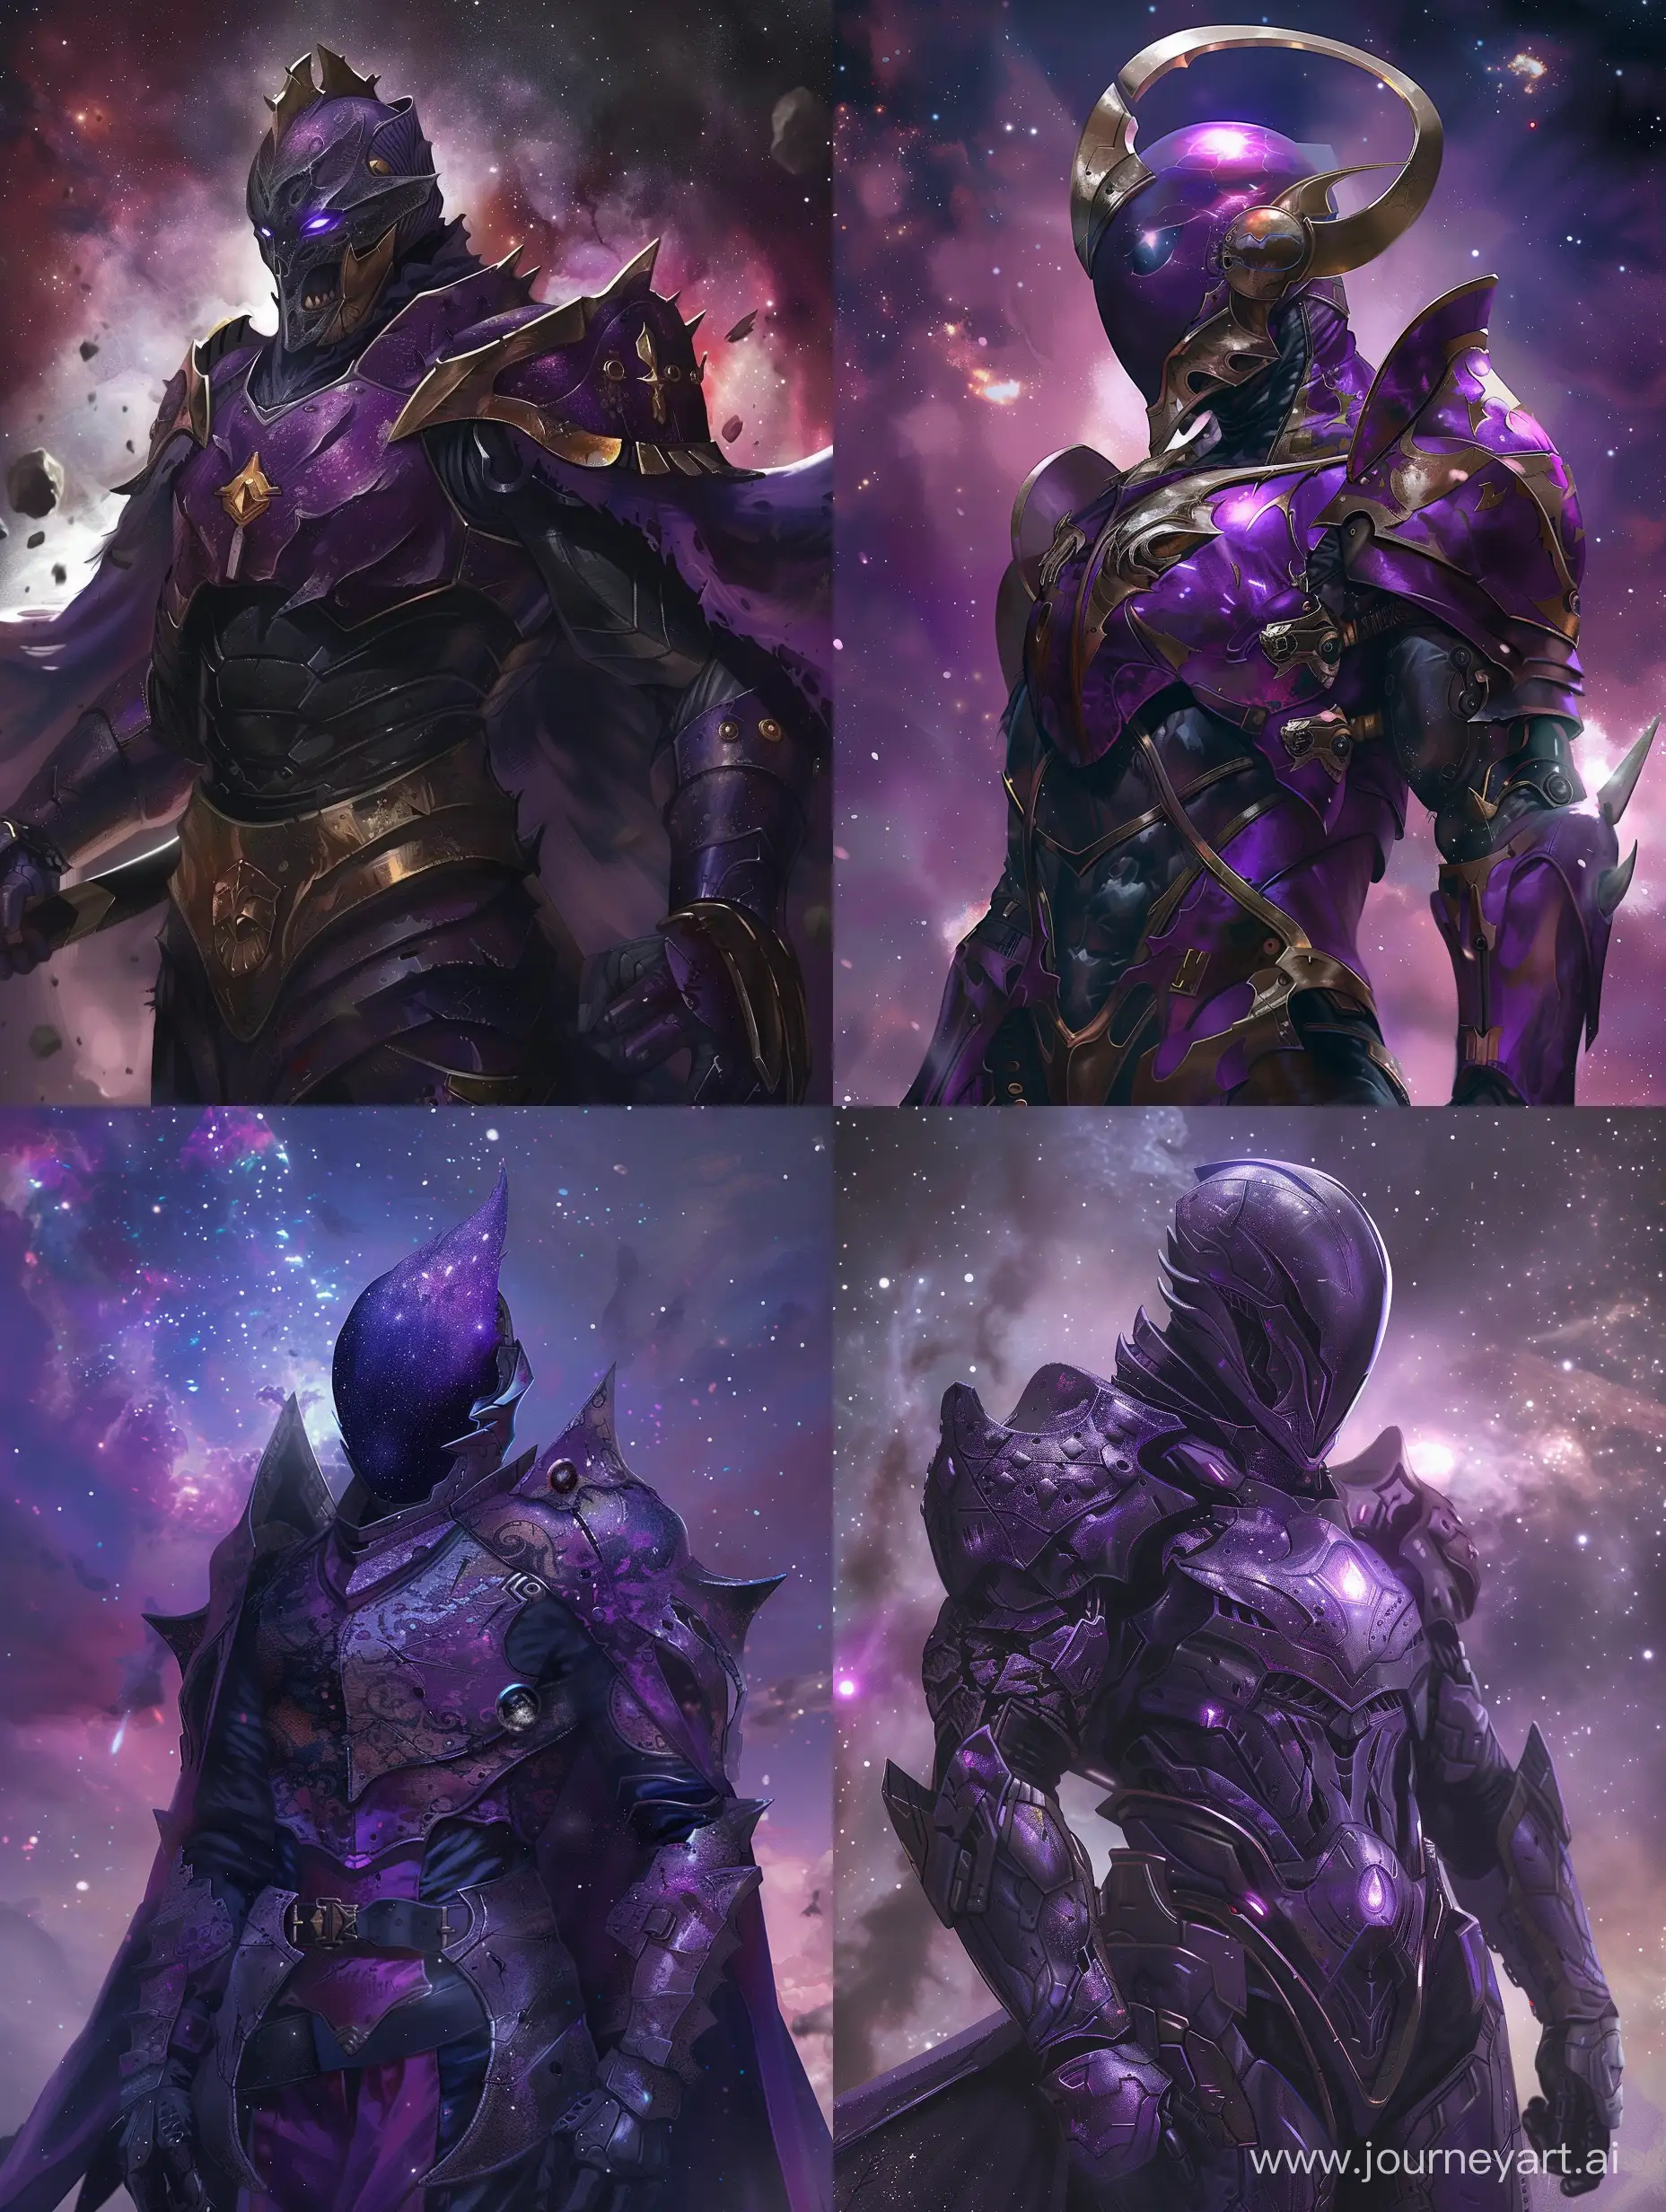 SciFi-Manga-Character-in-Void-Galaxy-with-Purple-Armor-and-Eyesless-Mask